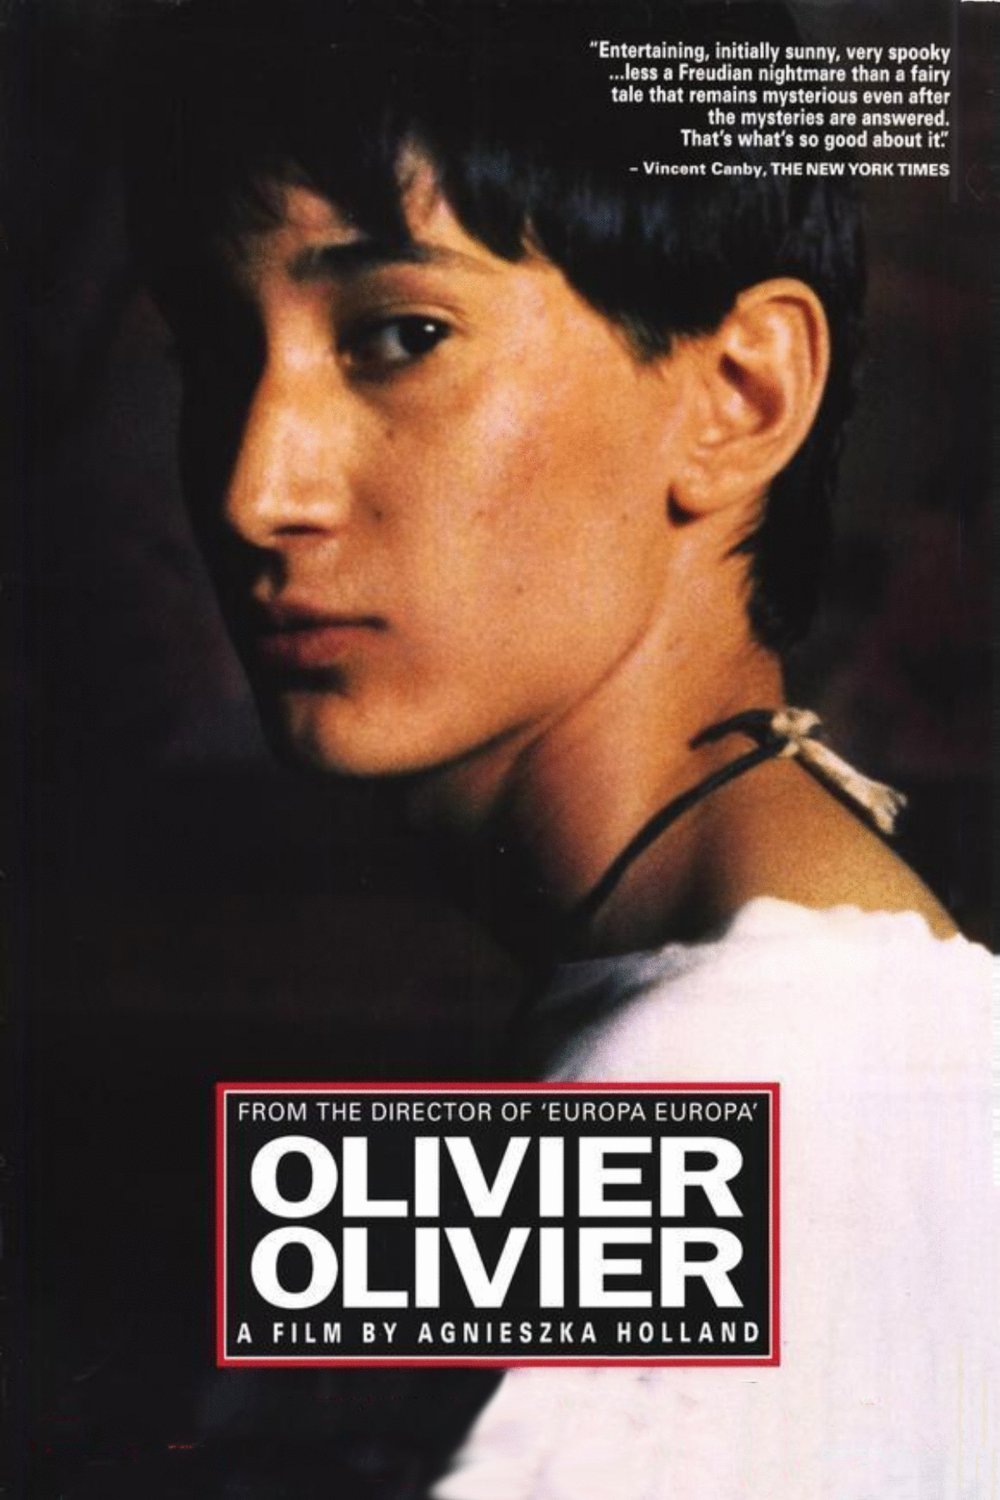 Poster of the movie Olivier, Olivier